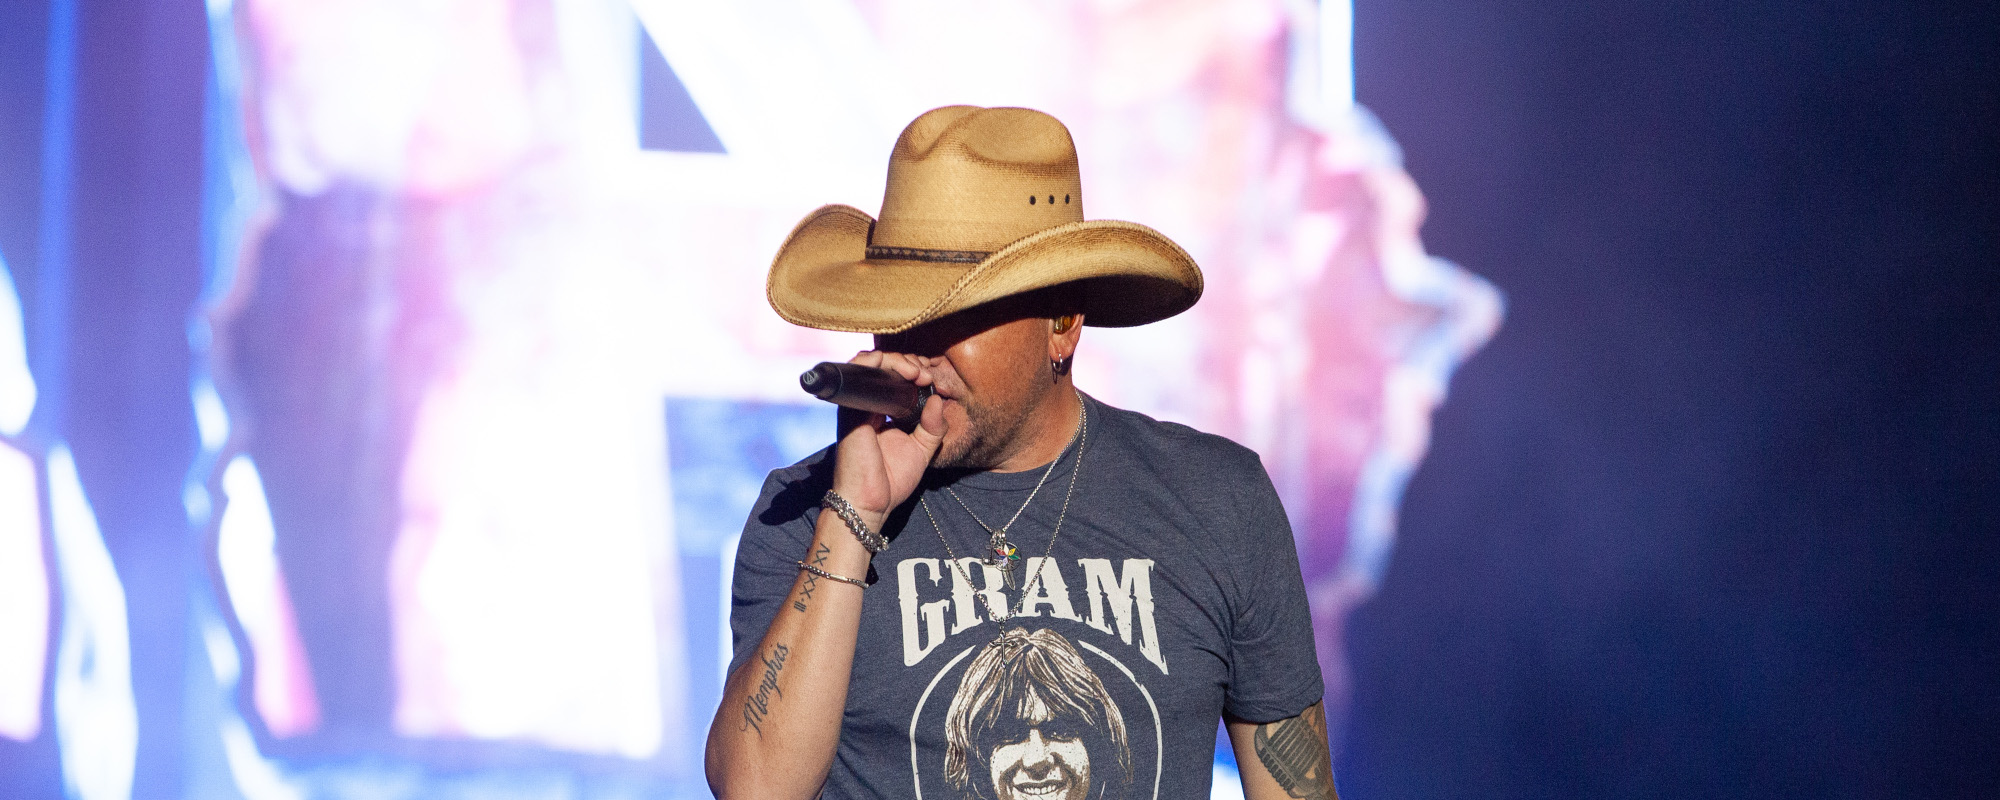 Jason Aldean’s Controversial “Try That in a Small Town” Hits No. 1 on Hot 100